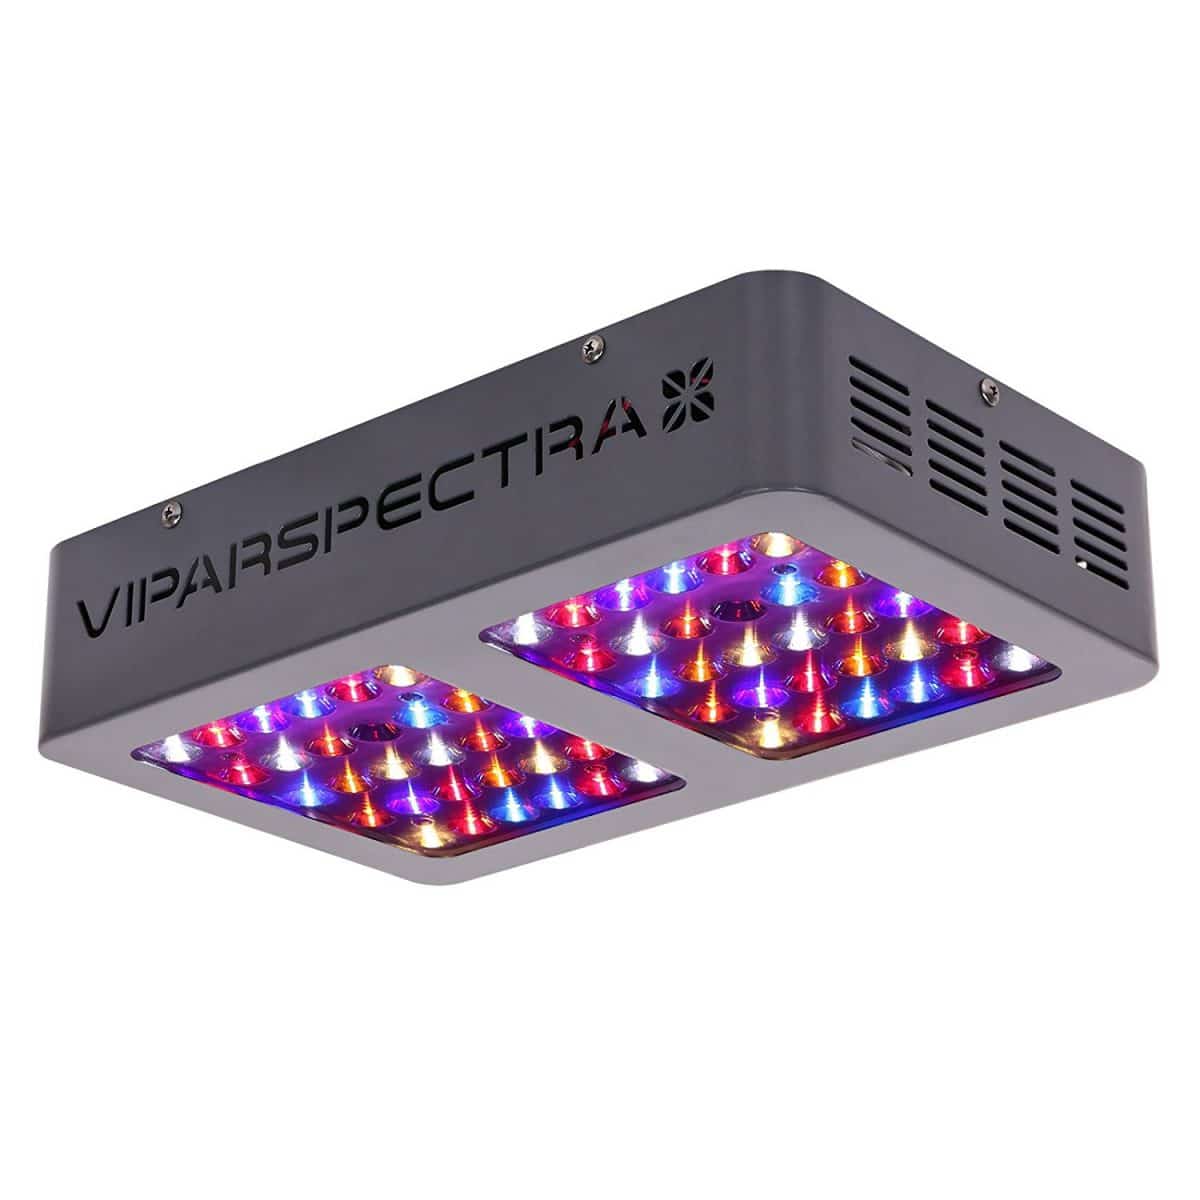 Viparspectra LED Grow Light Review - Smart Garden Guide